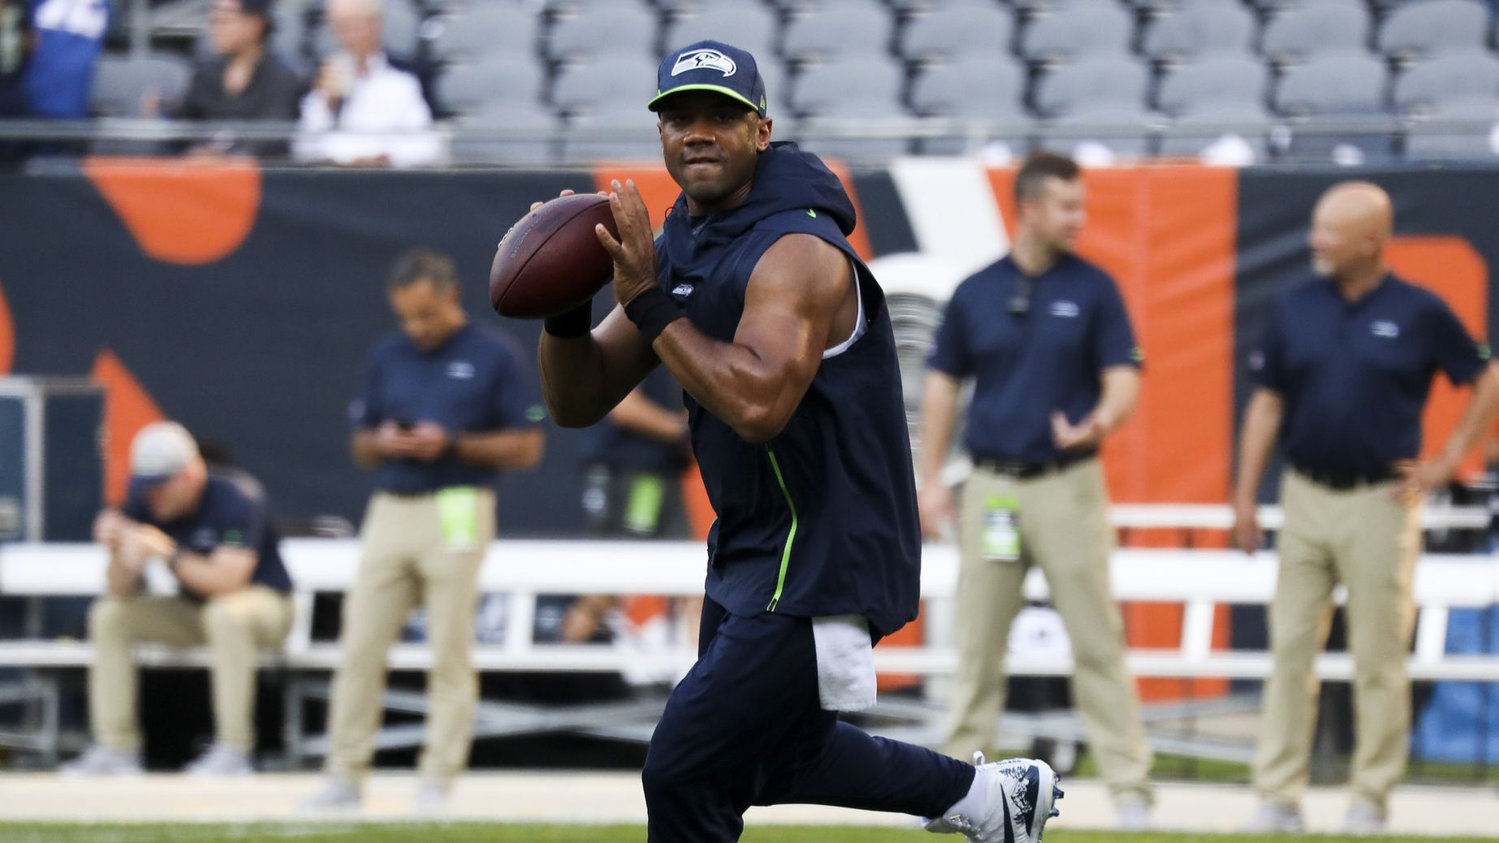 Russell Wilson will lead the Seahawks offense under new offensive coordinator Shane Waldron this season.